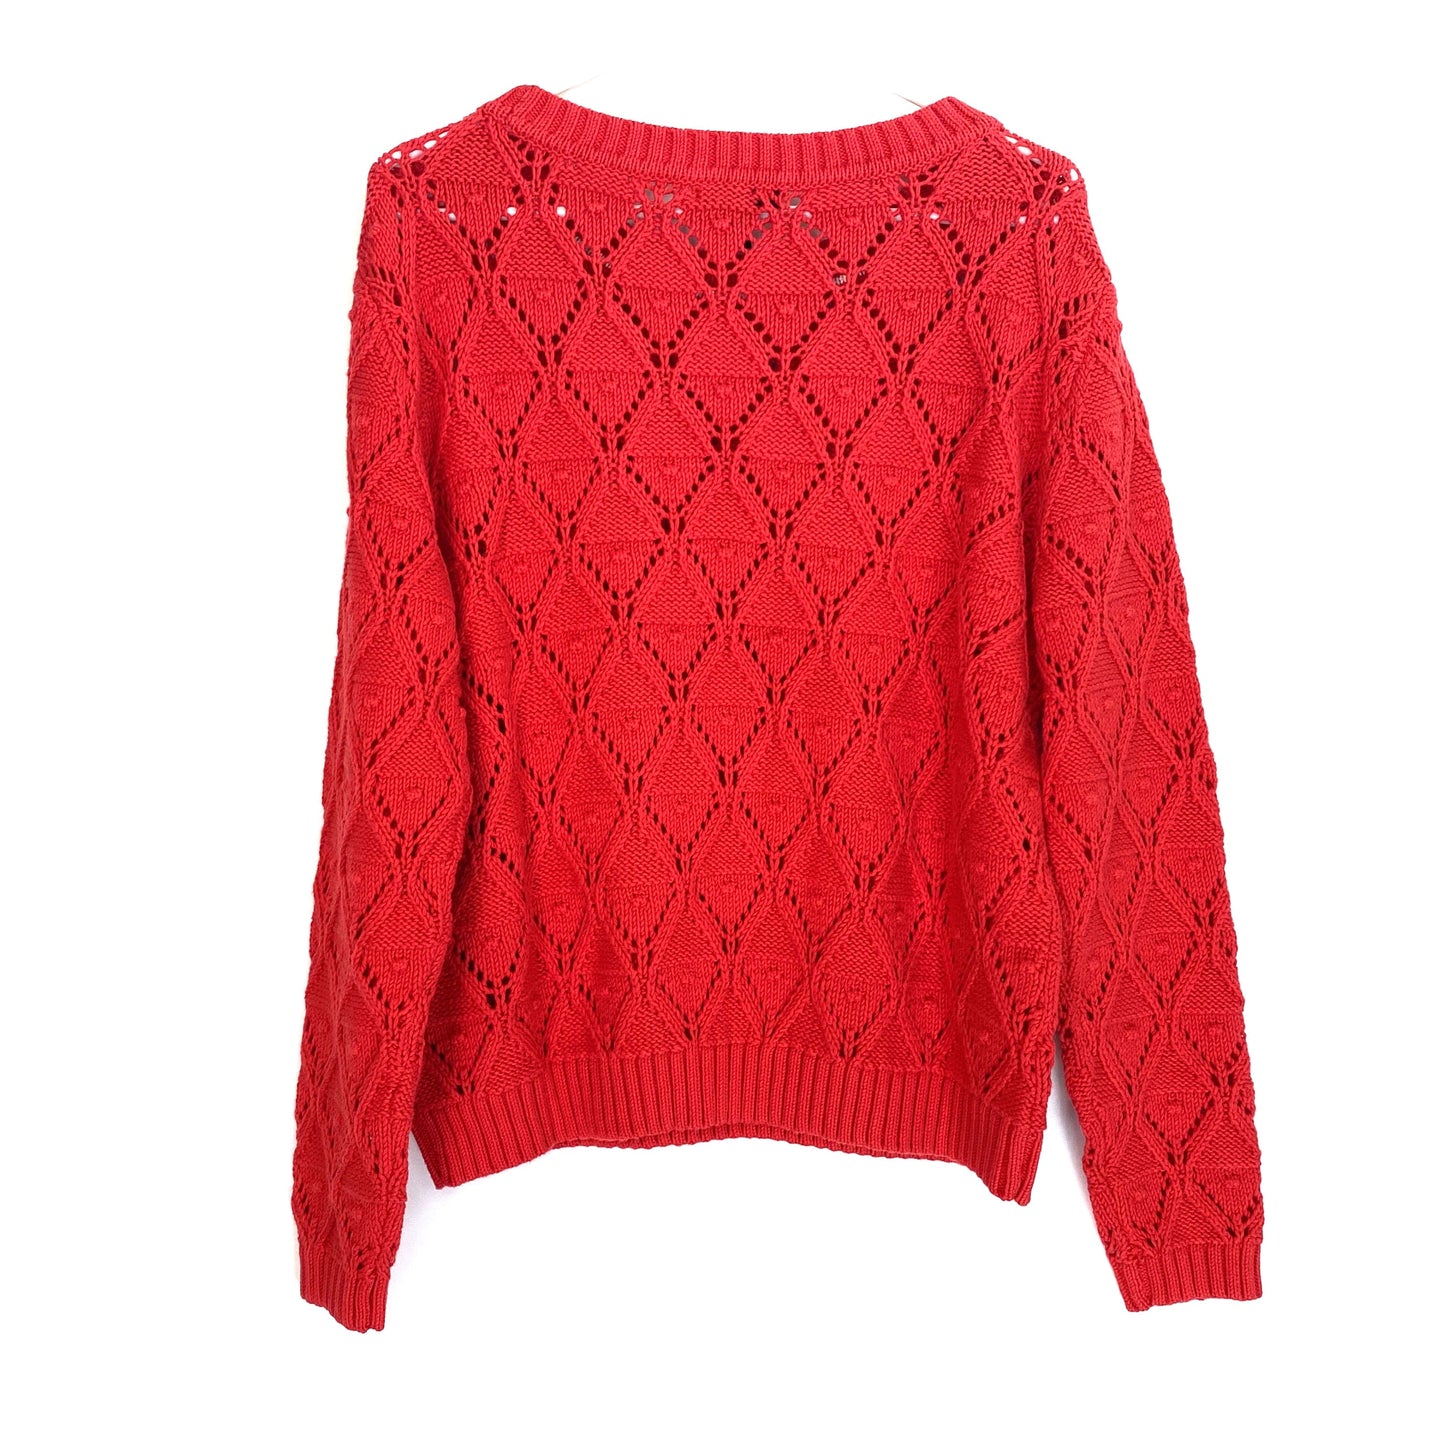 Tommy Hilfiger Womens Crocheted Knitted Sweater, Red Diamond Pattern - Size XL